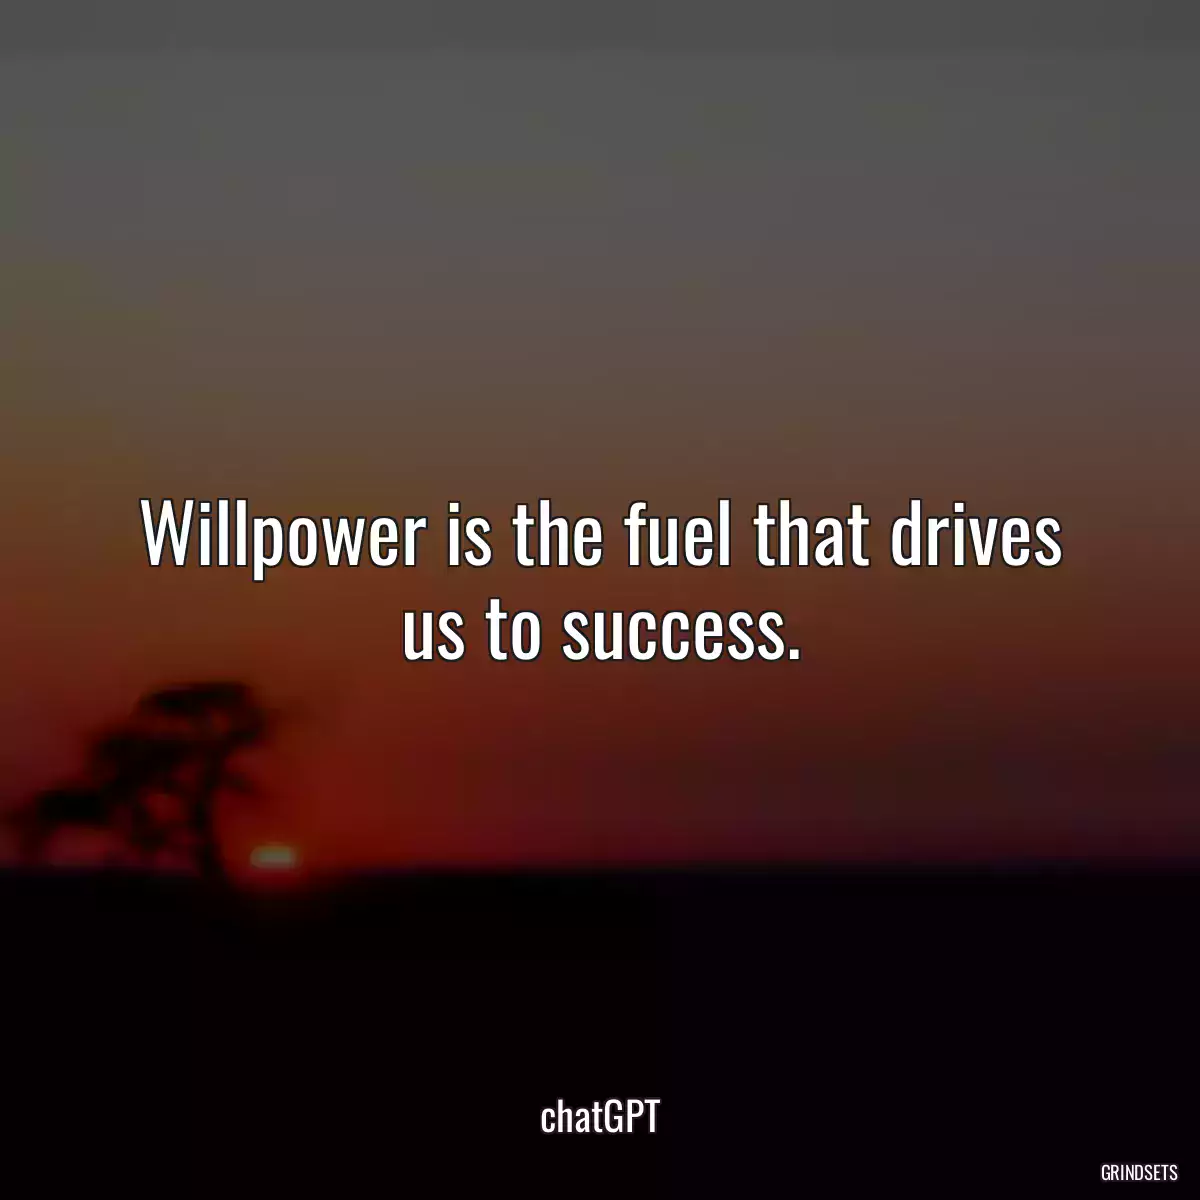 Willpower is the fuel that drives us to success.